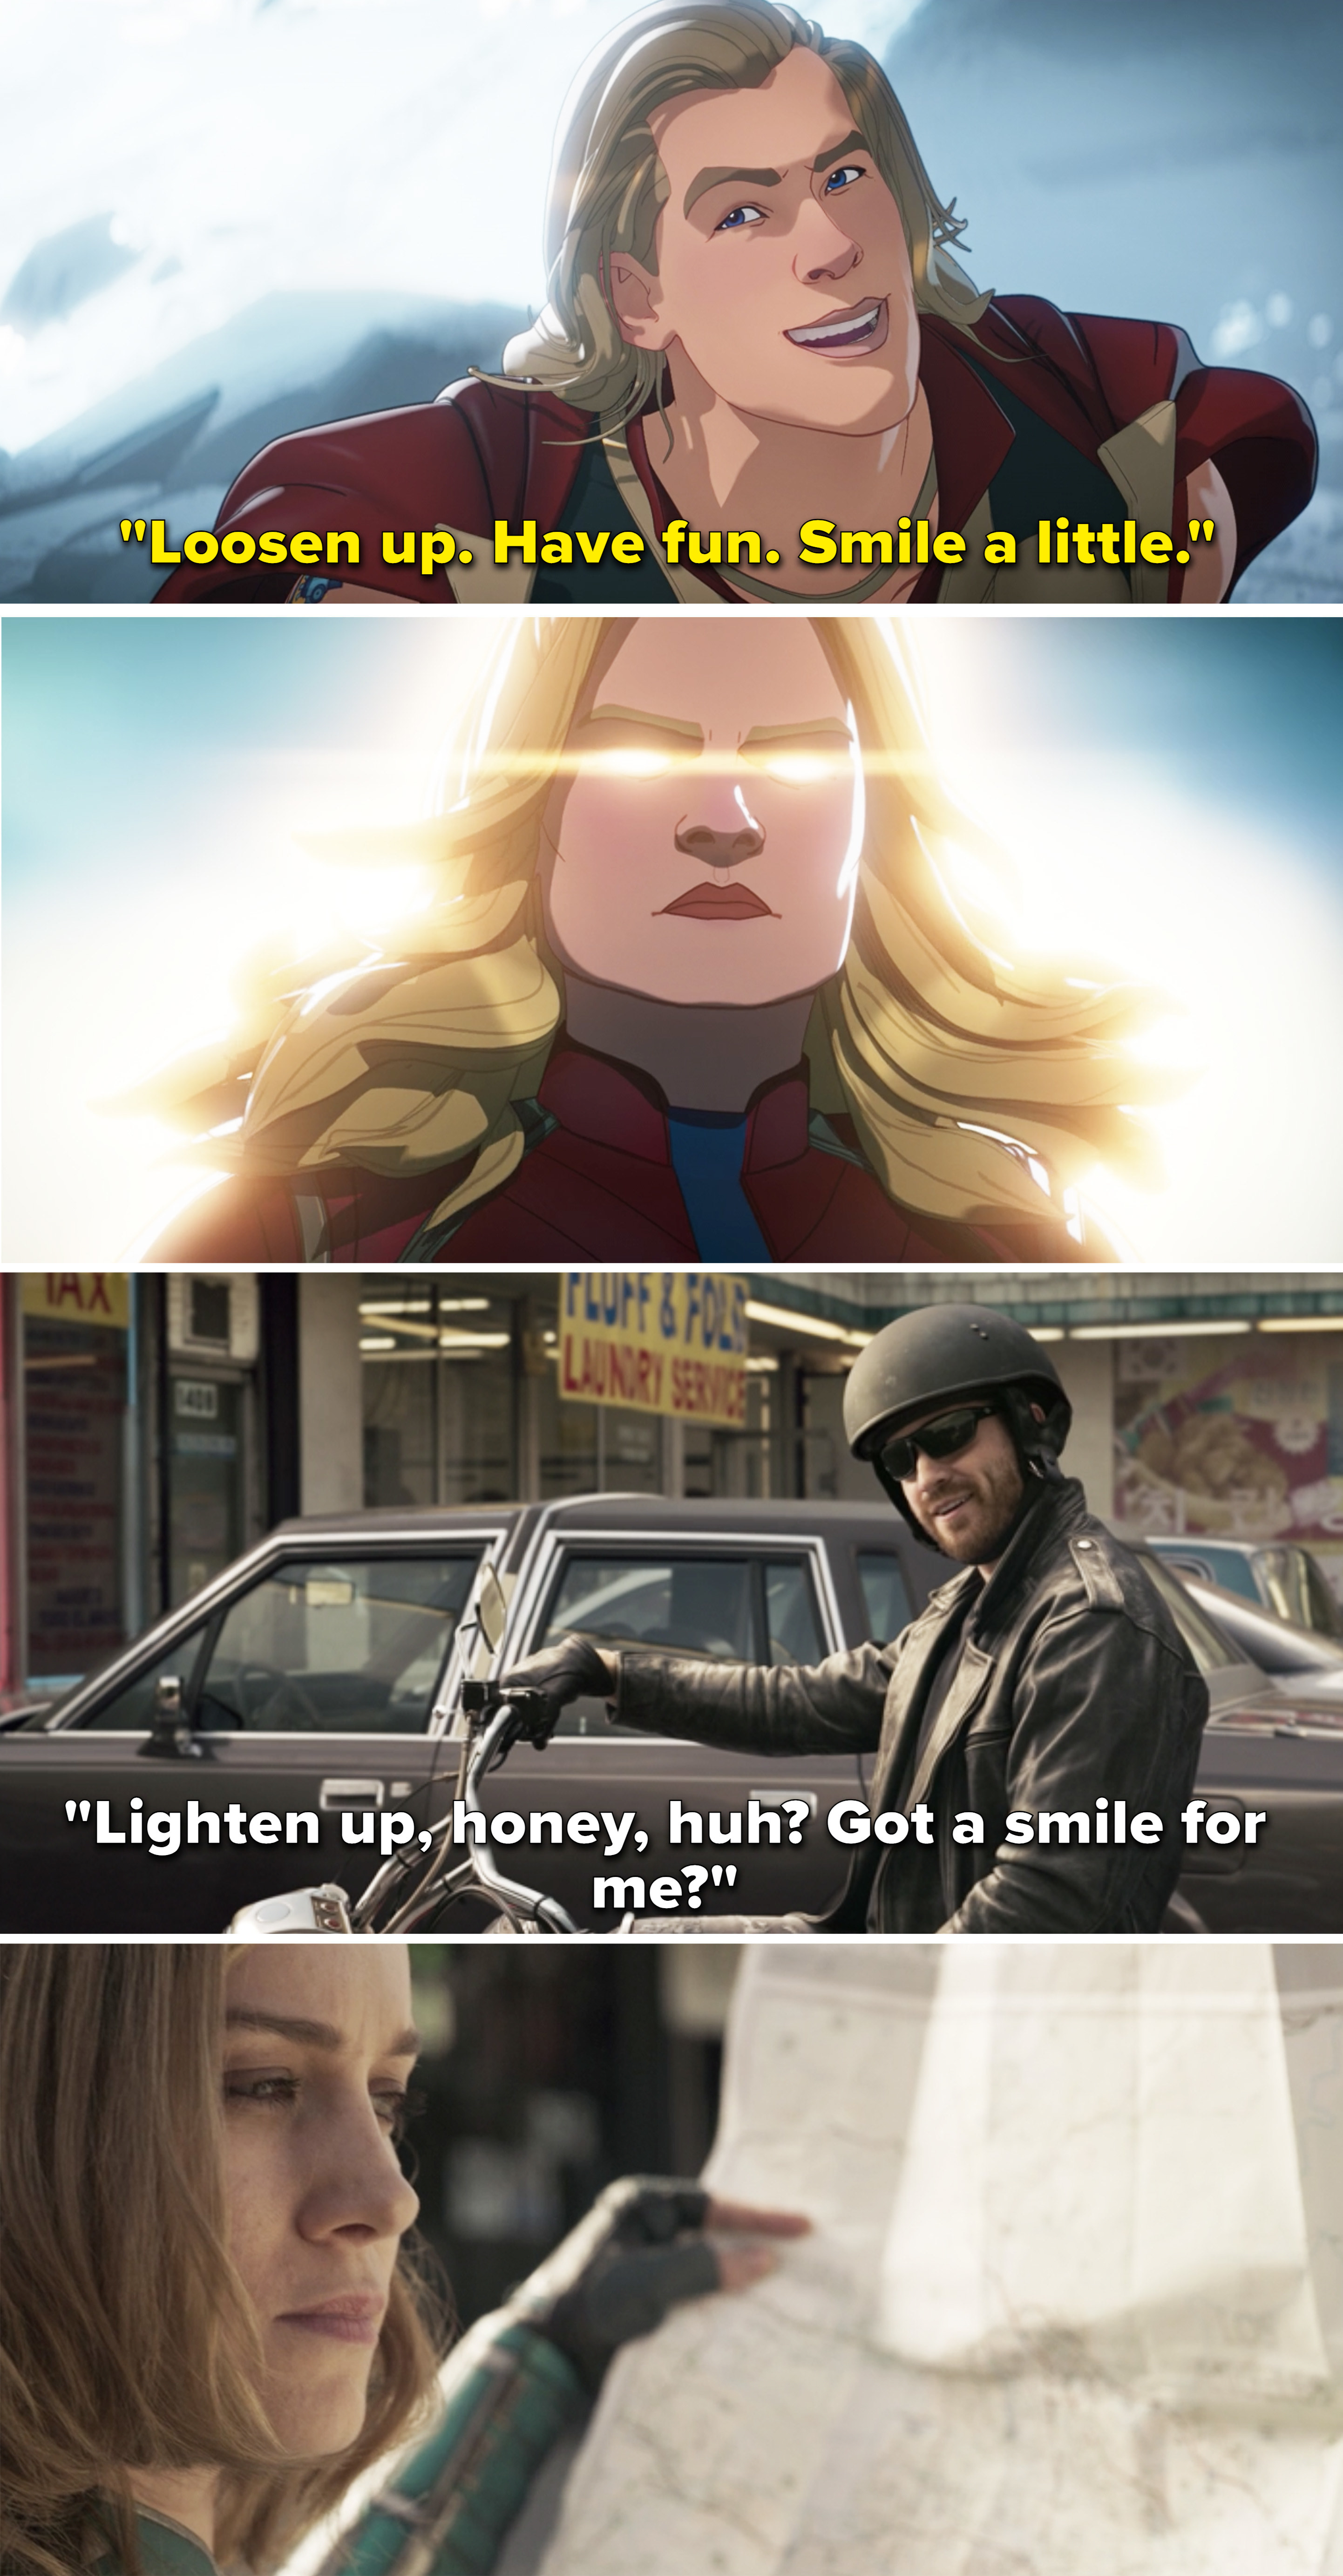 Thor saying, &quot;Loosen up; have fun; smile a little,&quot; vs a guy in Captain Marvel saying, &quot;Lighten up, honey, huh? Got a smile for me?&quot;